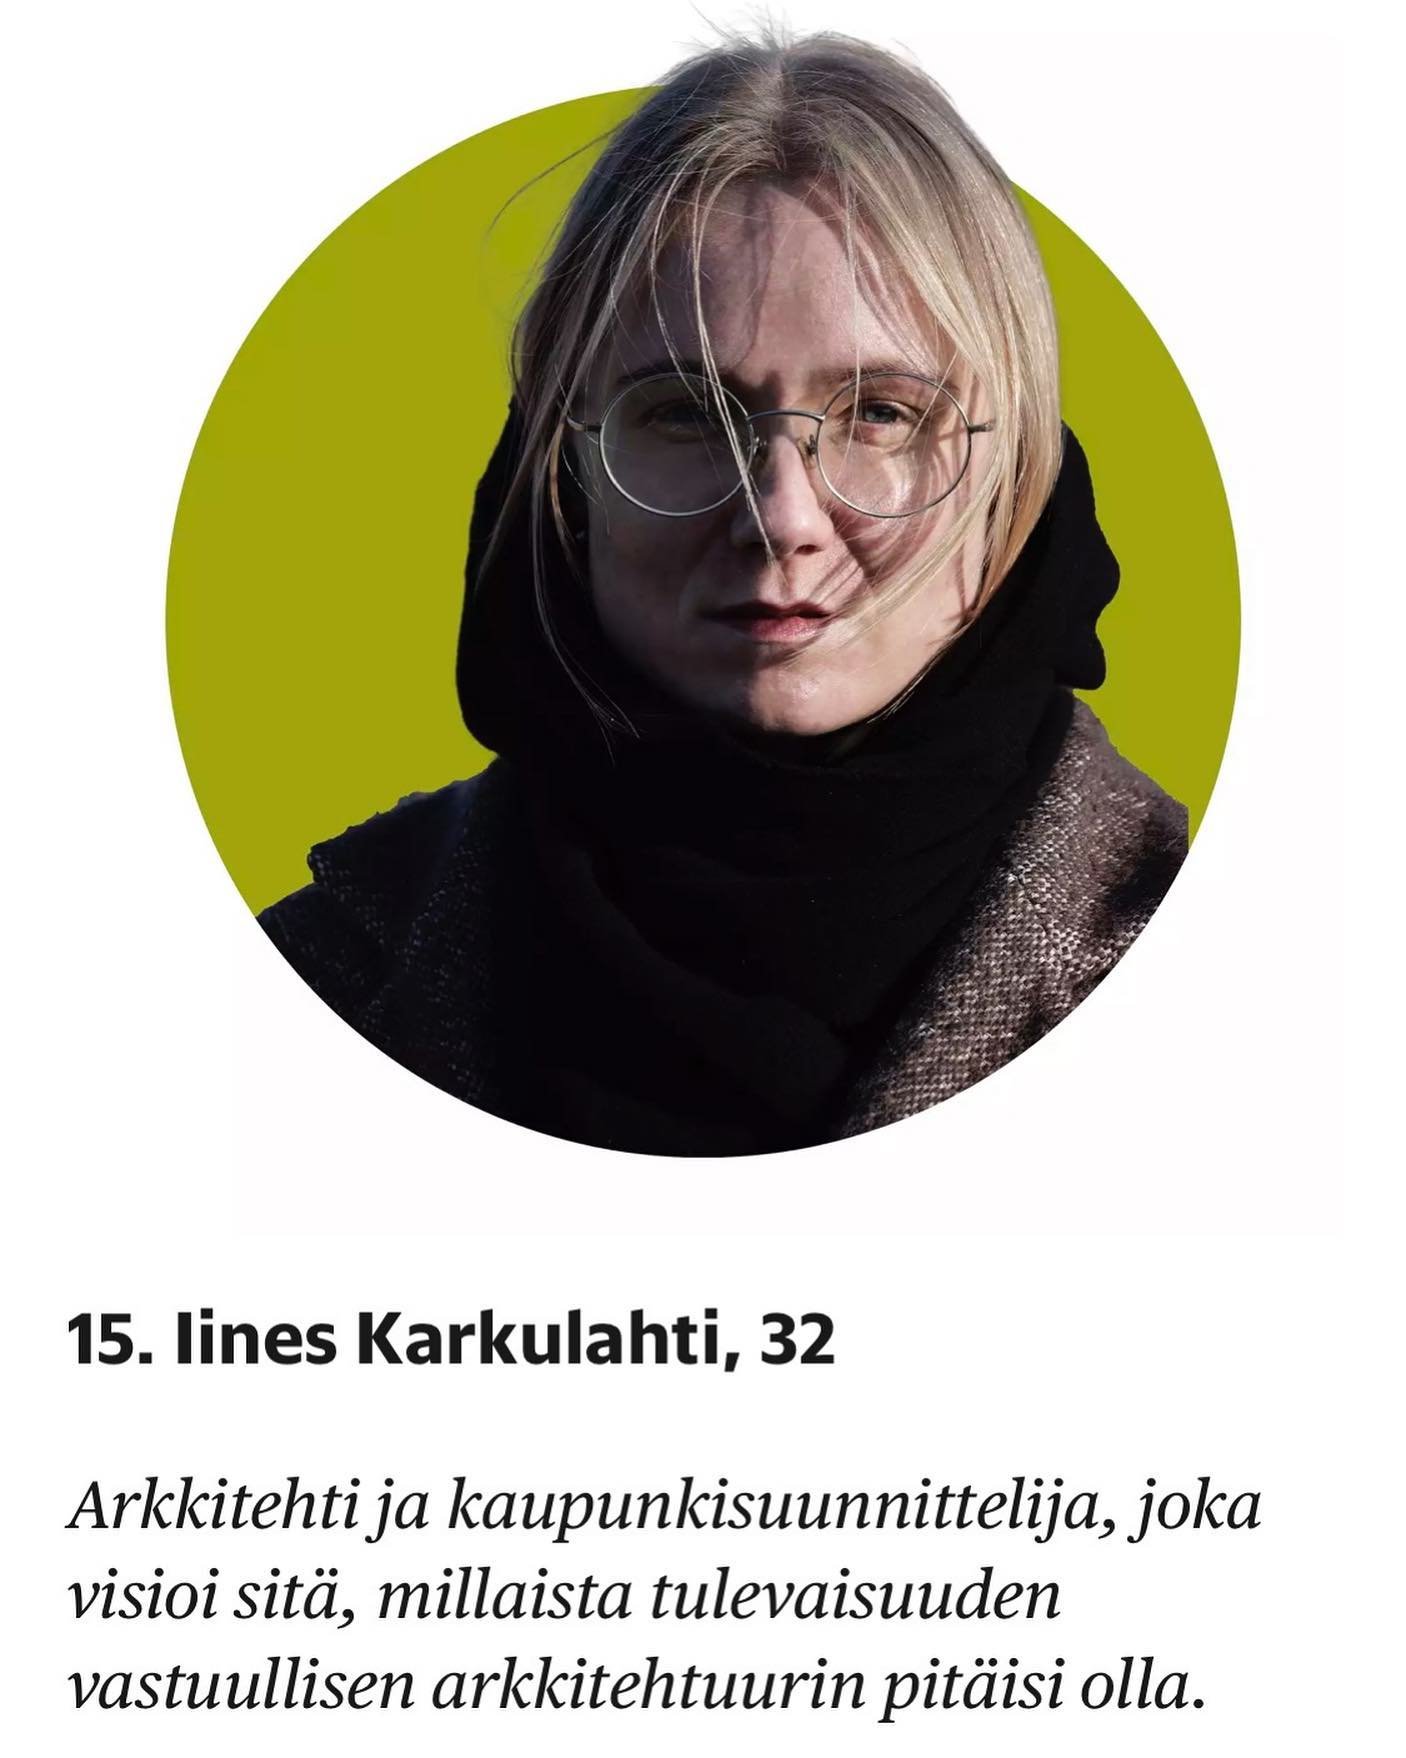 Our Iines was interviewed by @ainoainoaino for @helsinginsanomat as part of the &ldquo;35 under 35&rdquo; article.

&rdquo;
What are you proud of? 
We founded Vapaa Collective in 2019 to study the current state and potential futures of being an archi